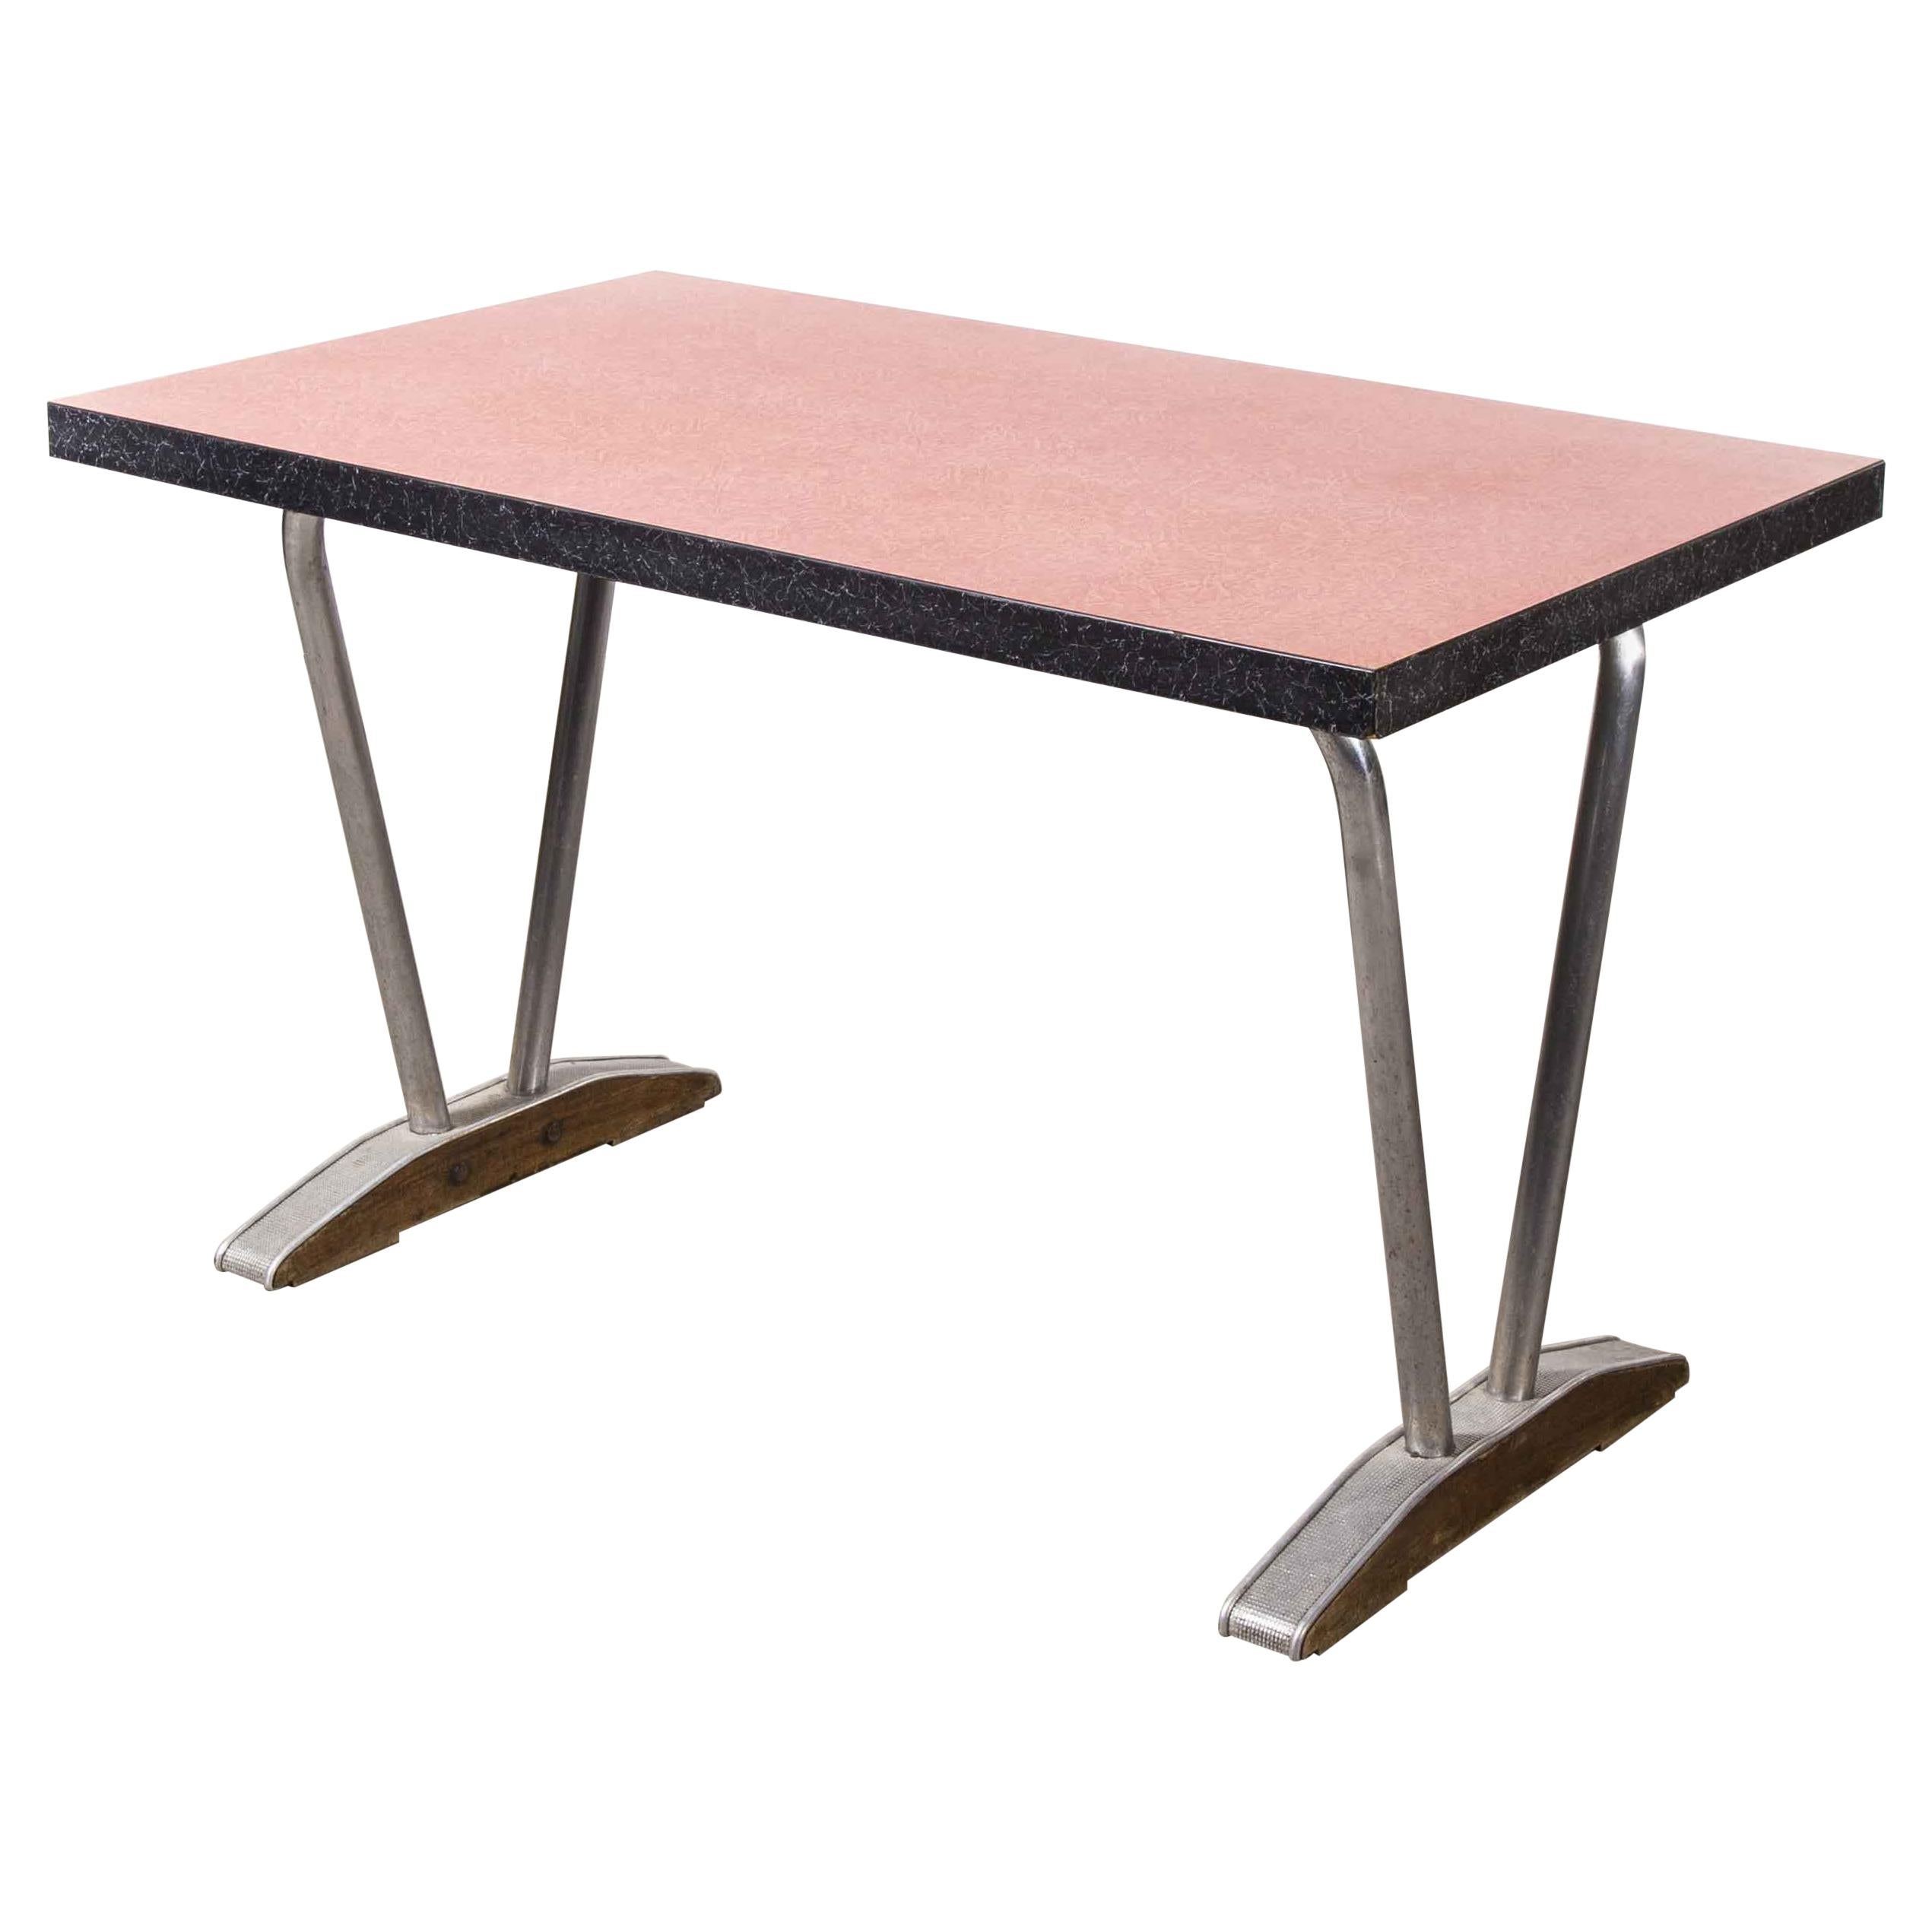 1960’s French Red Laminate Dining Table with Aluminium Base, Rectangular